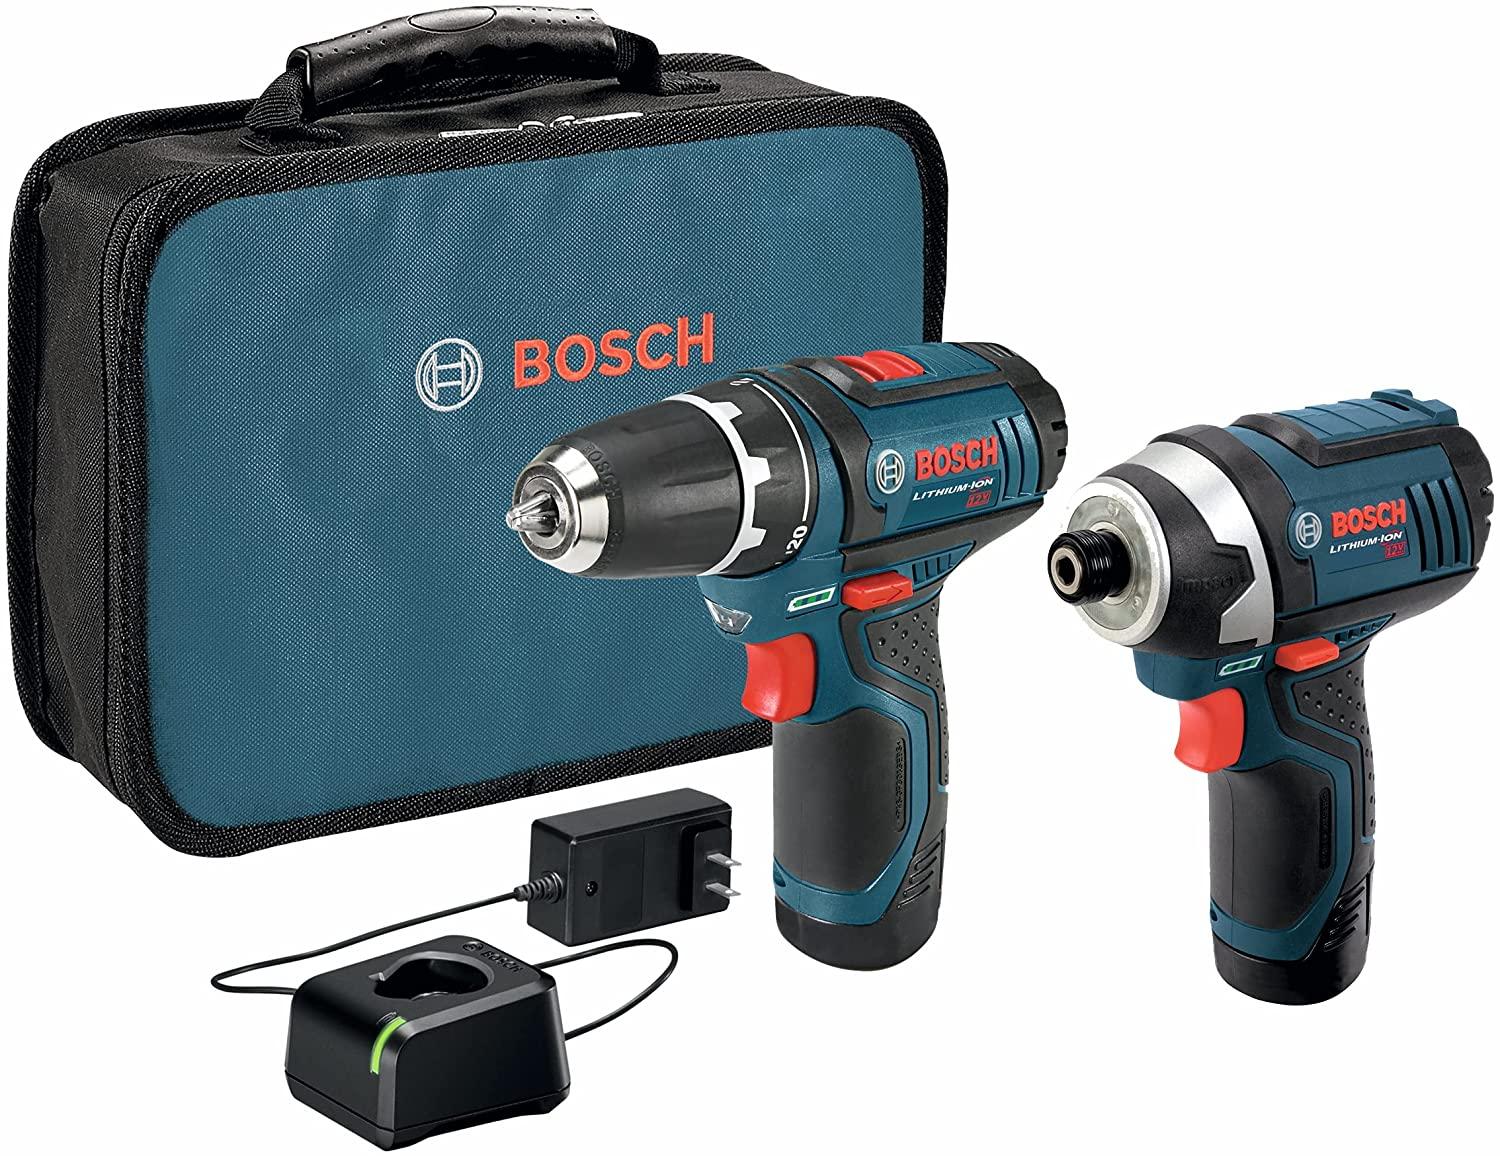 Bosch 12V Max Lithium-Ion 2 Drill Driver Kit for $99 Shipped